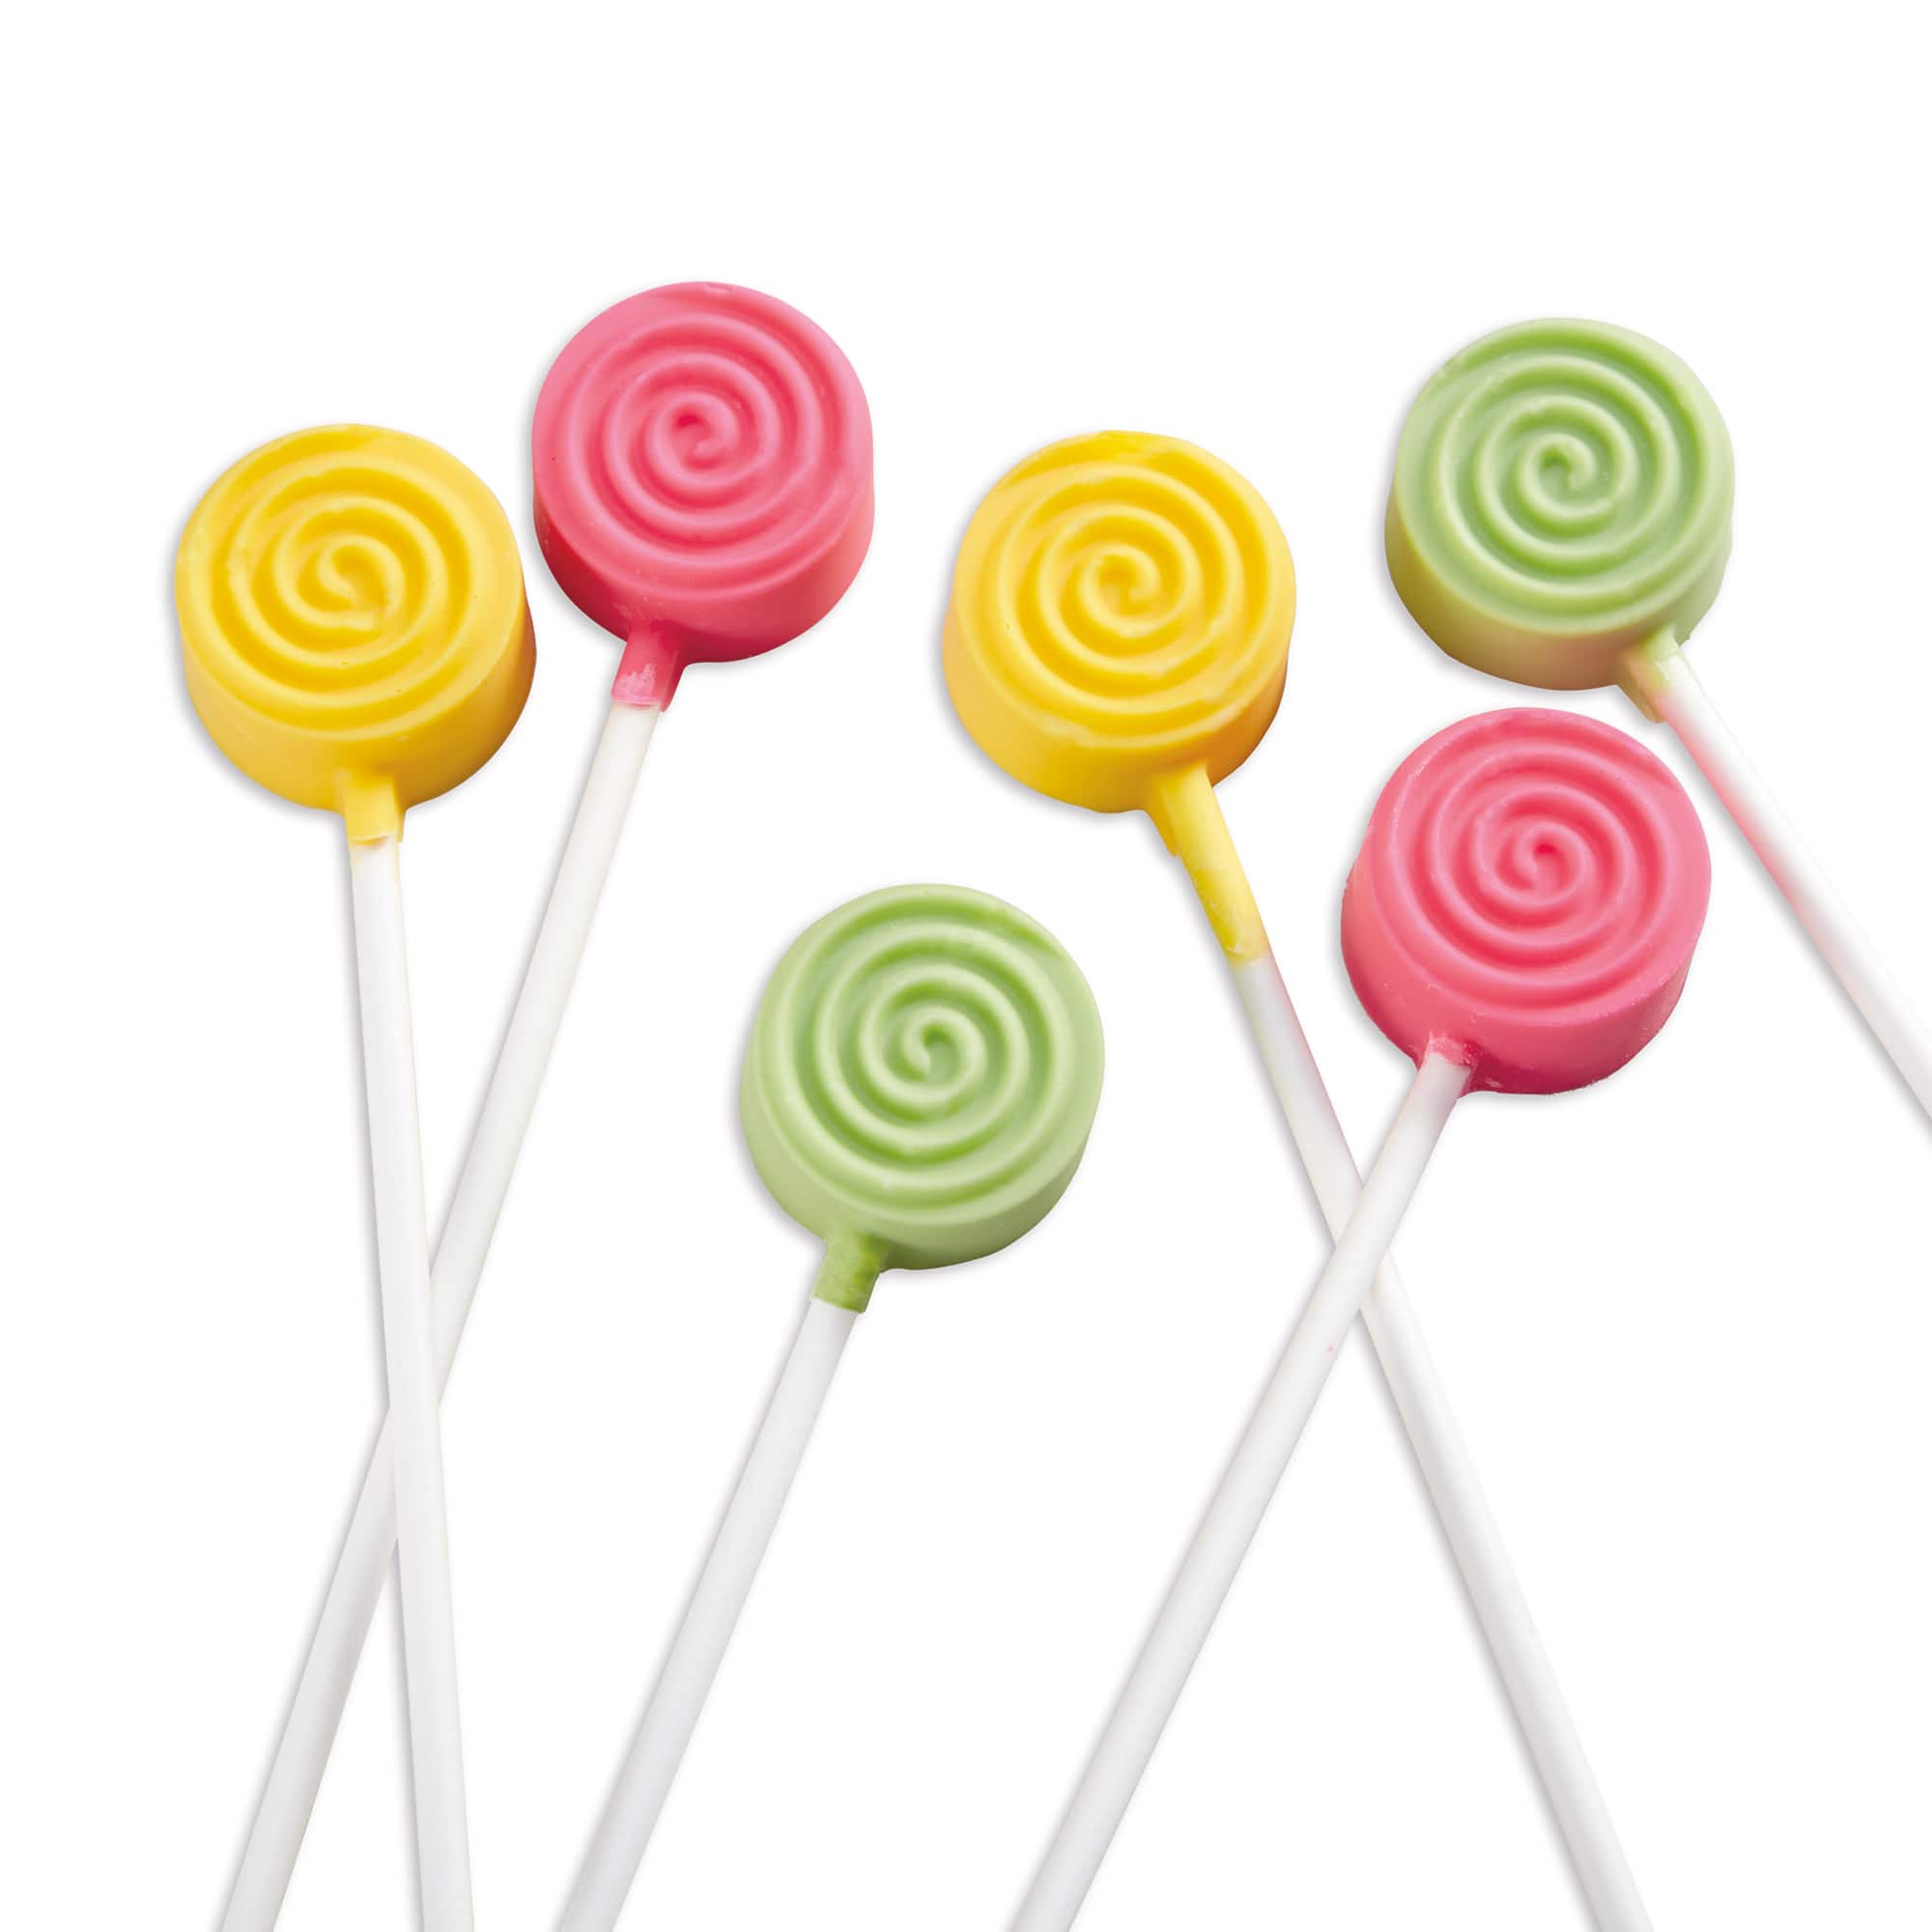 5.5 x 11 Silicone Popsicle Lollipop Candy Mold by STIR